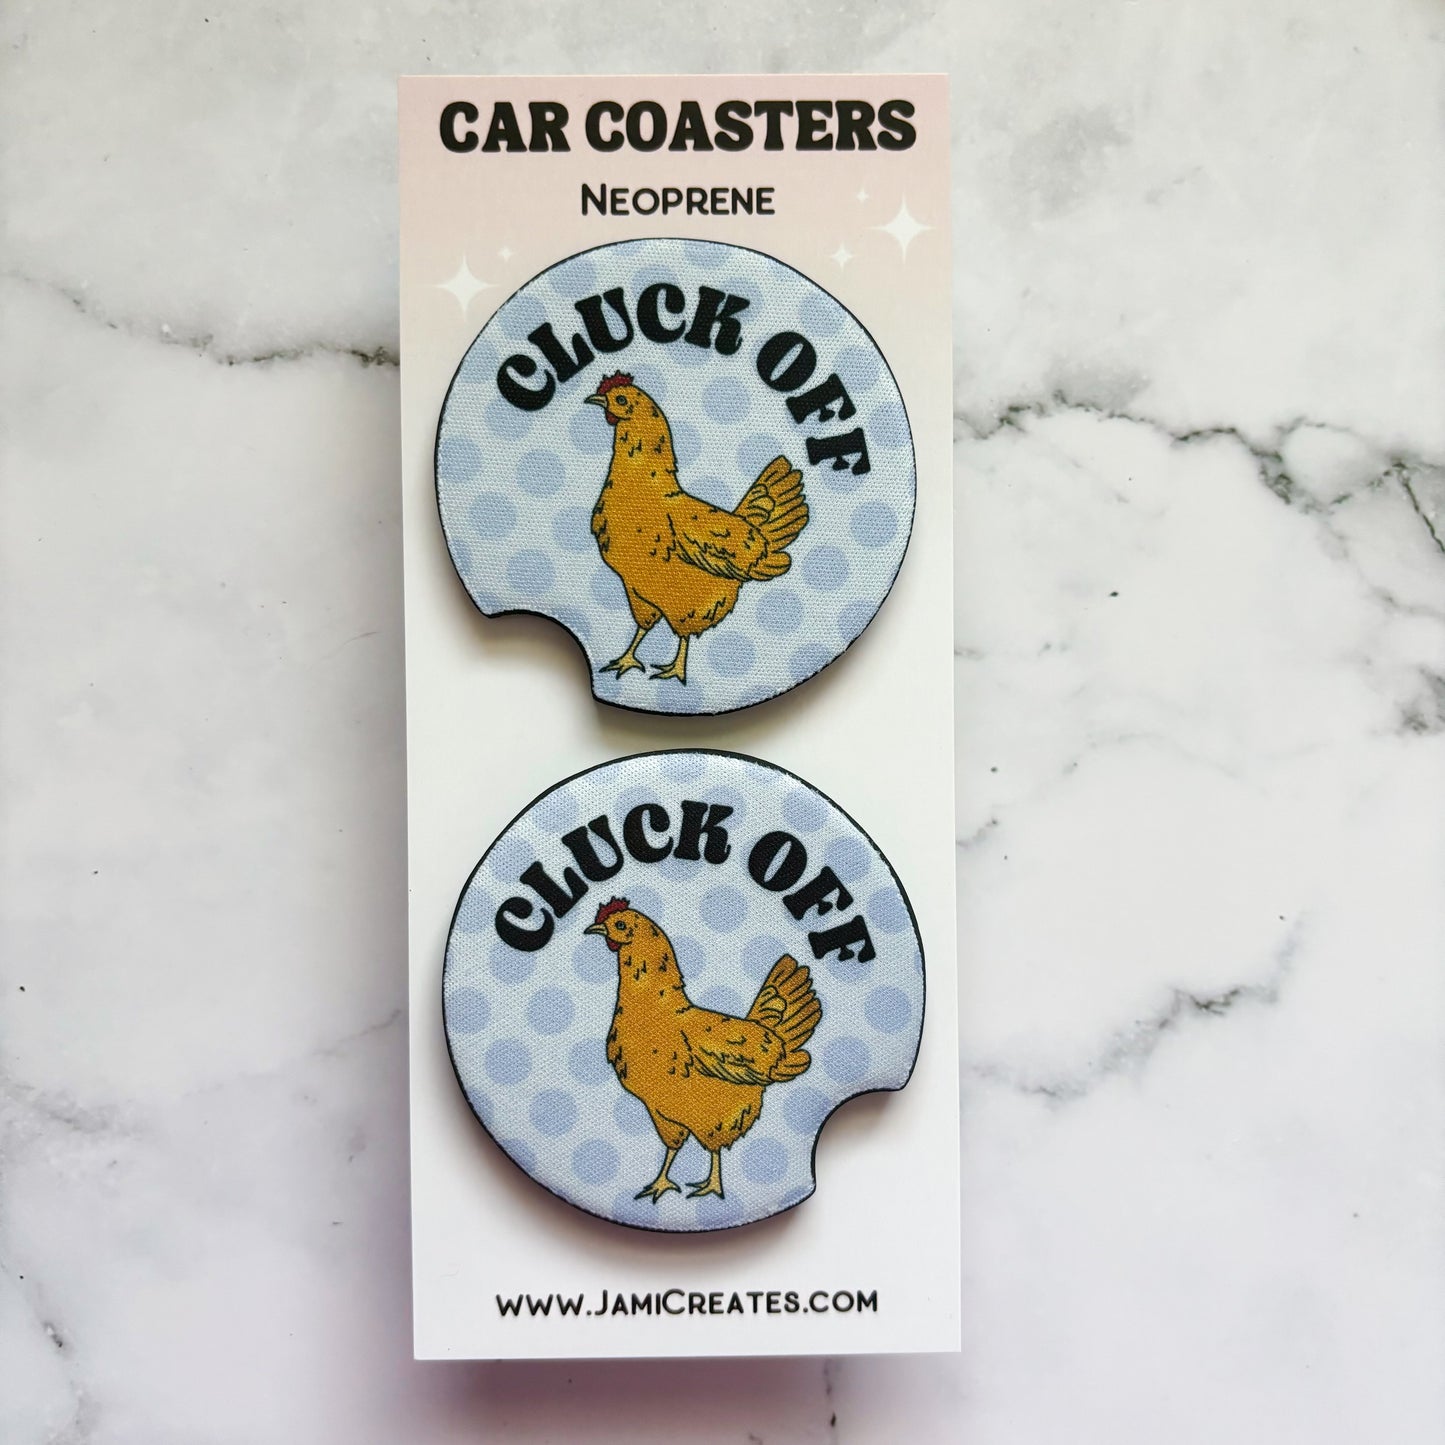 Cluck Off Chickens Car Coasters